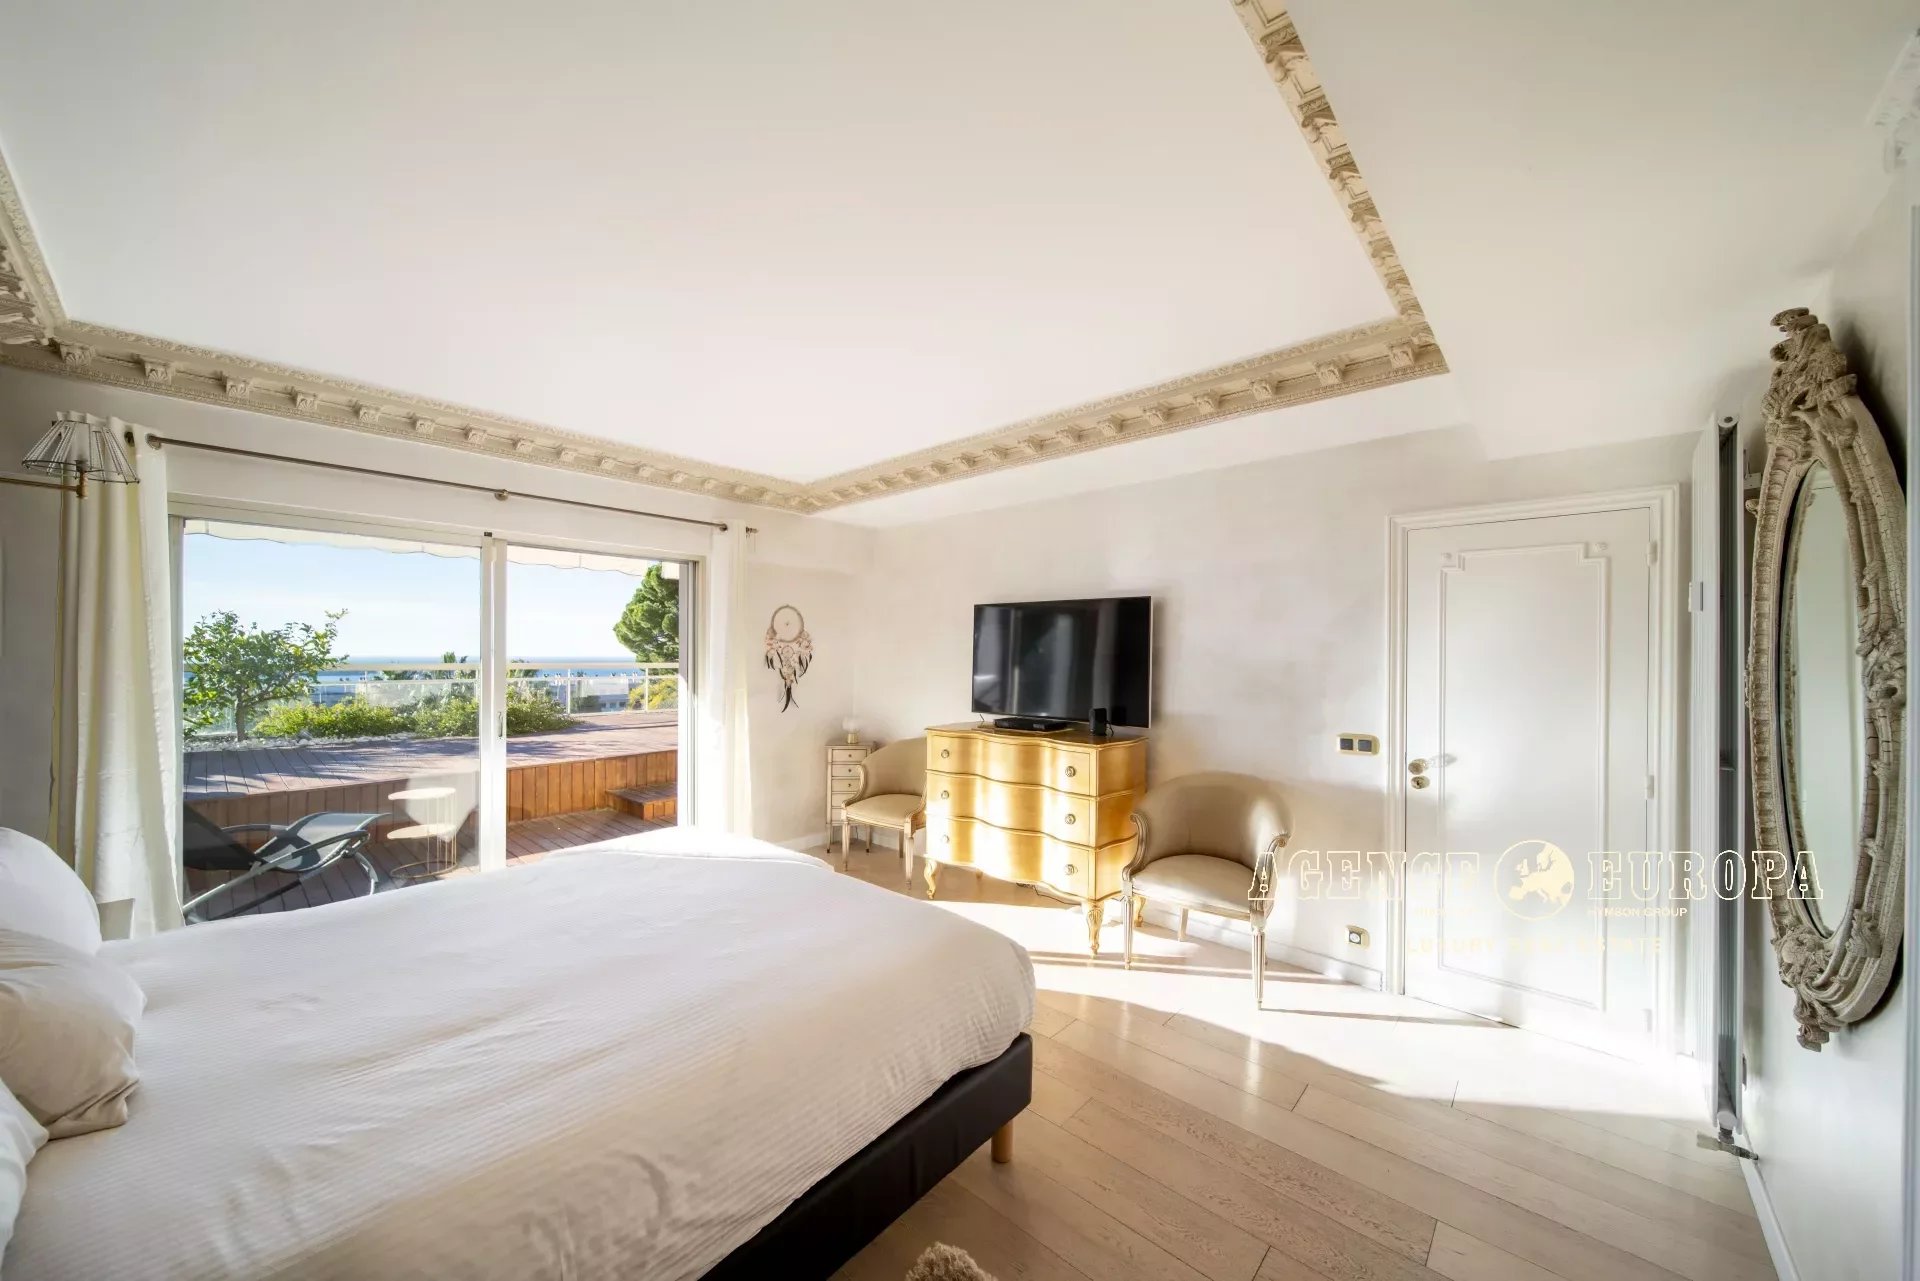 CANNES CALIFORNIE - LARGE APARTMENT ON THE GROUND FLOOR - SEA VIEW